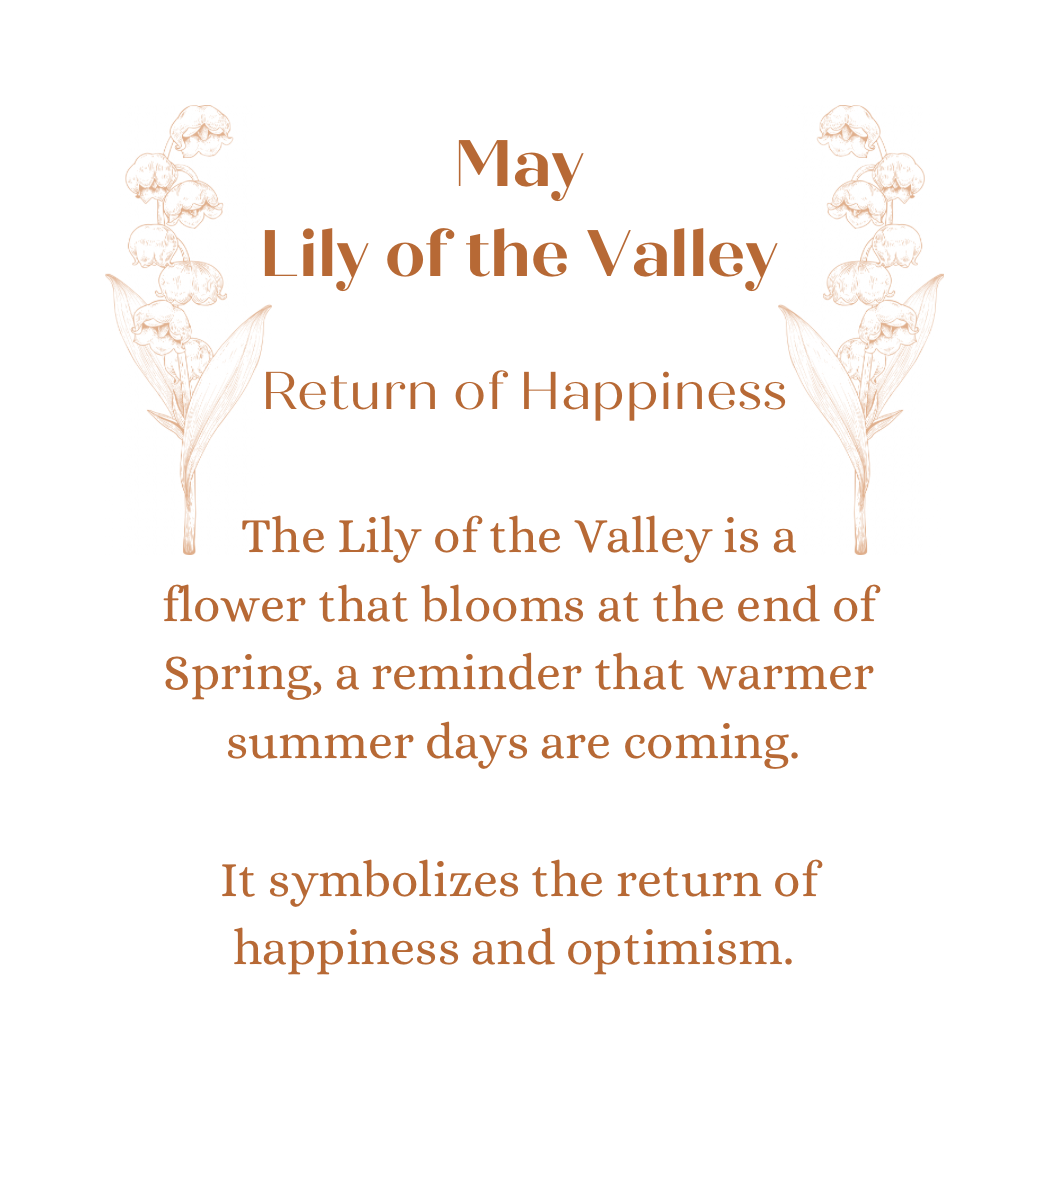 May Lily of the Valley in Hera